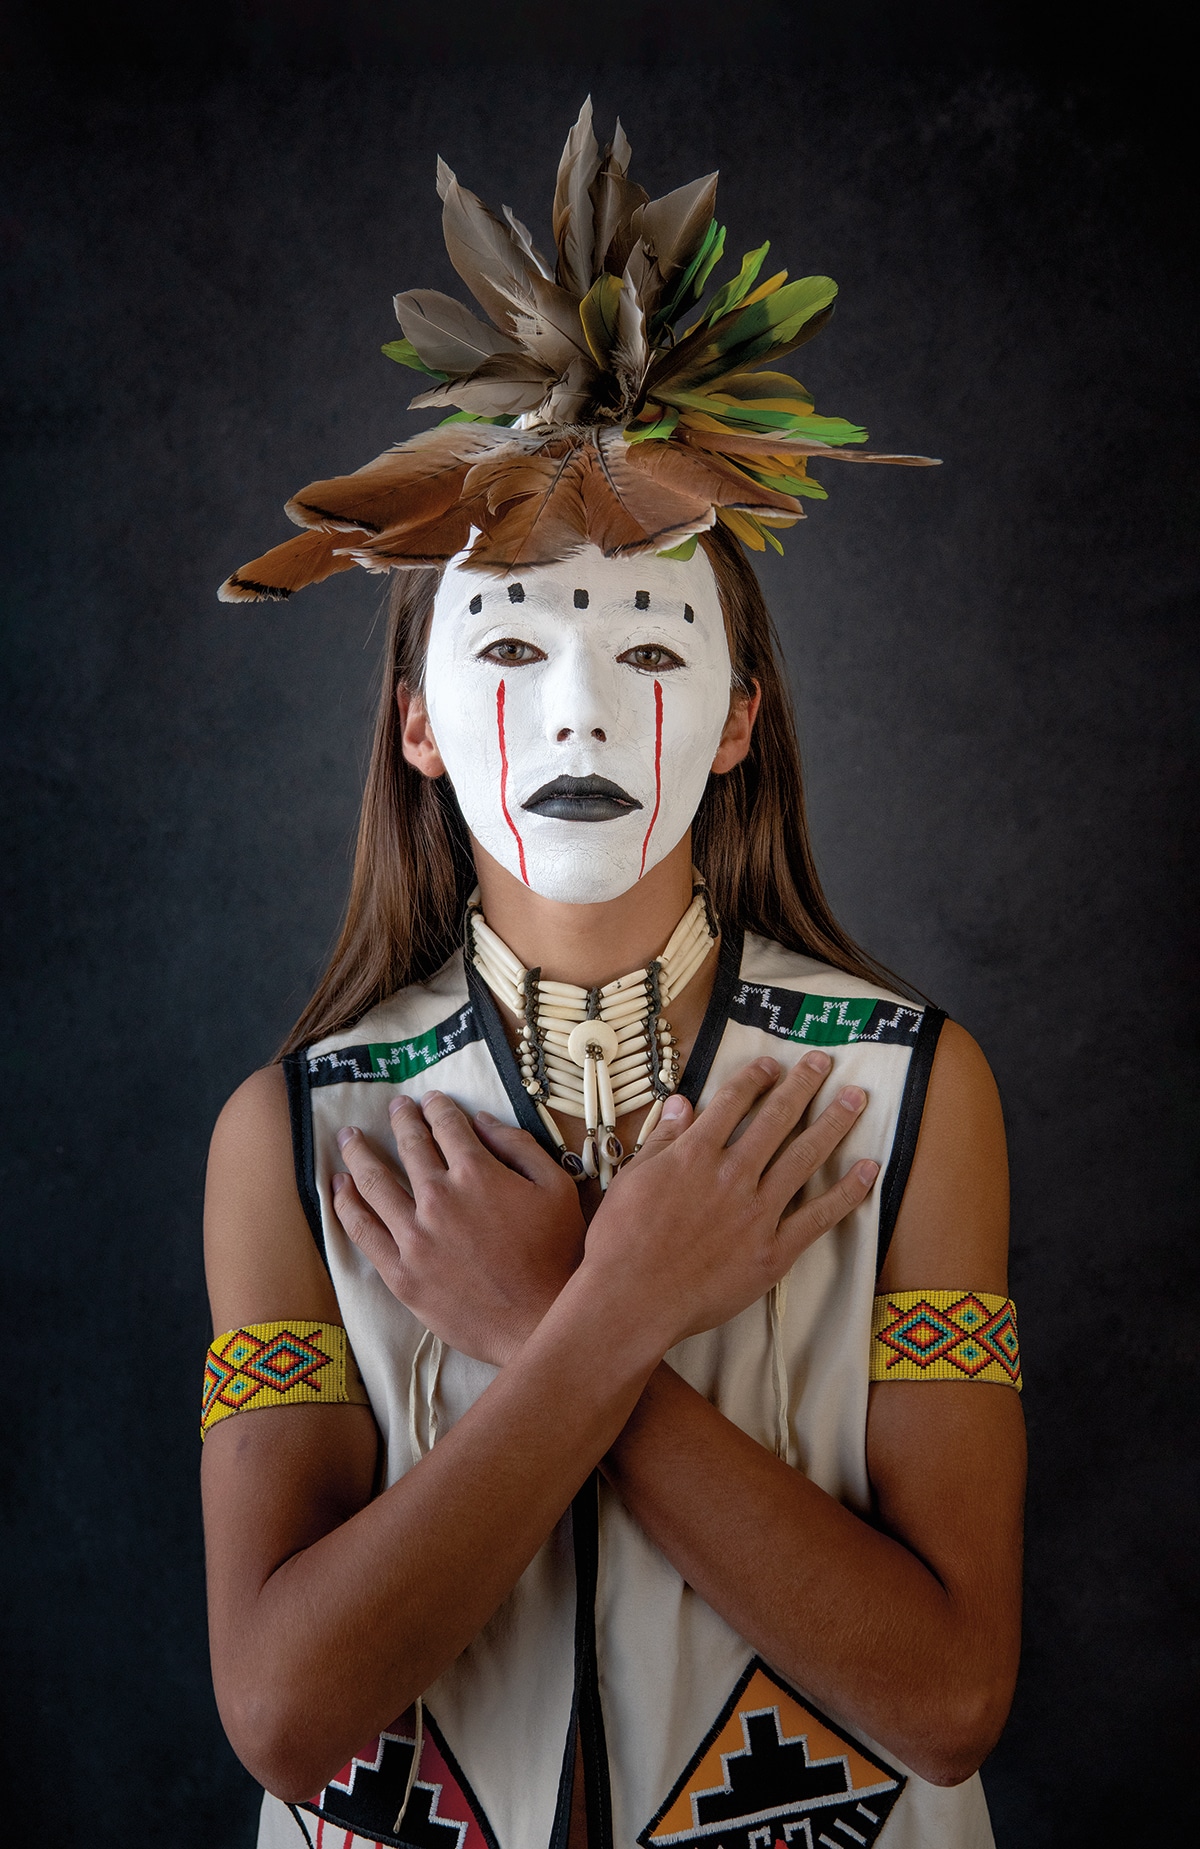 Photographers share reflections on their identity during Native